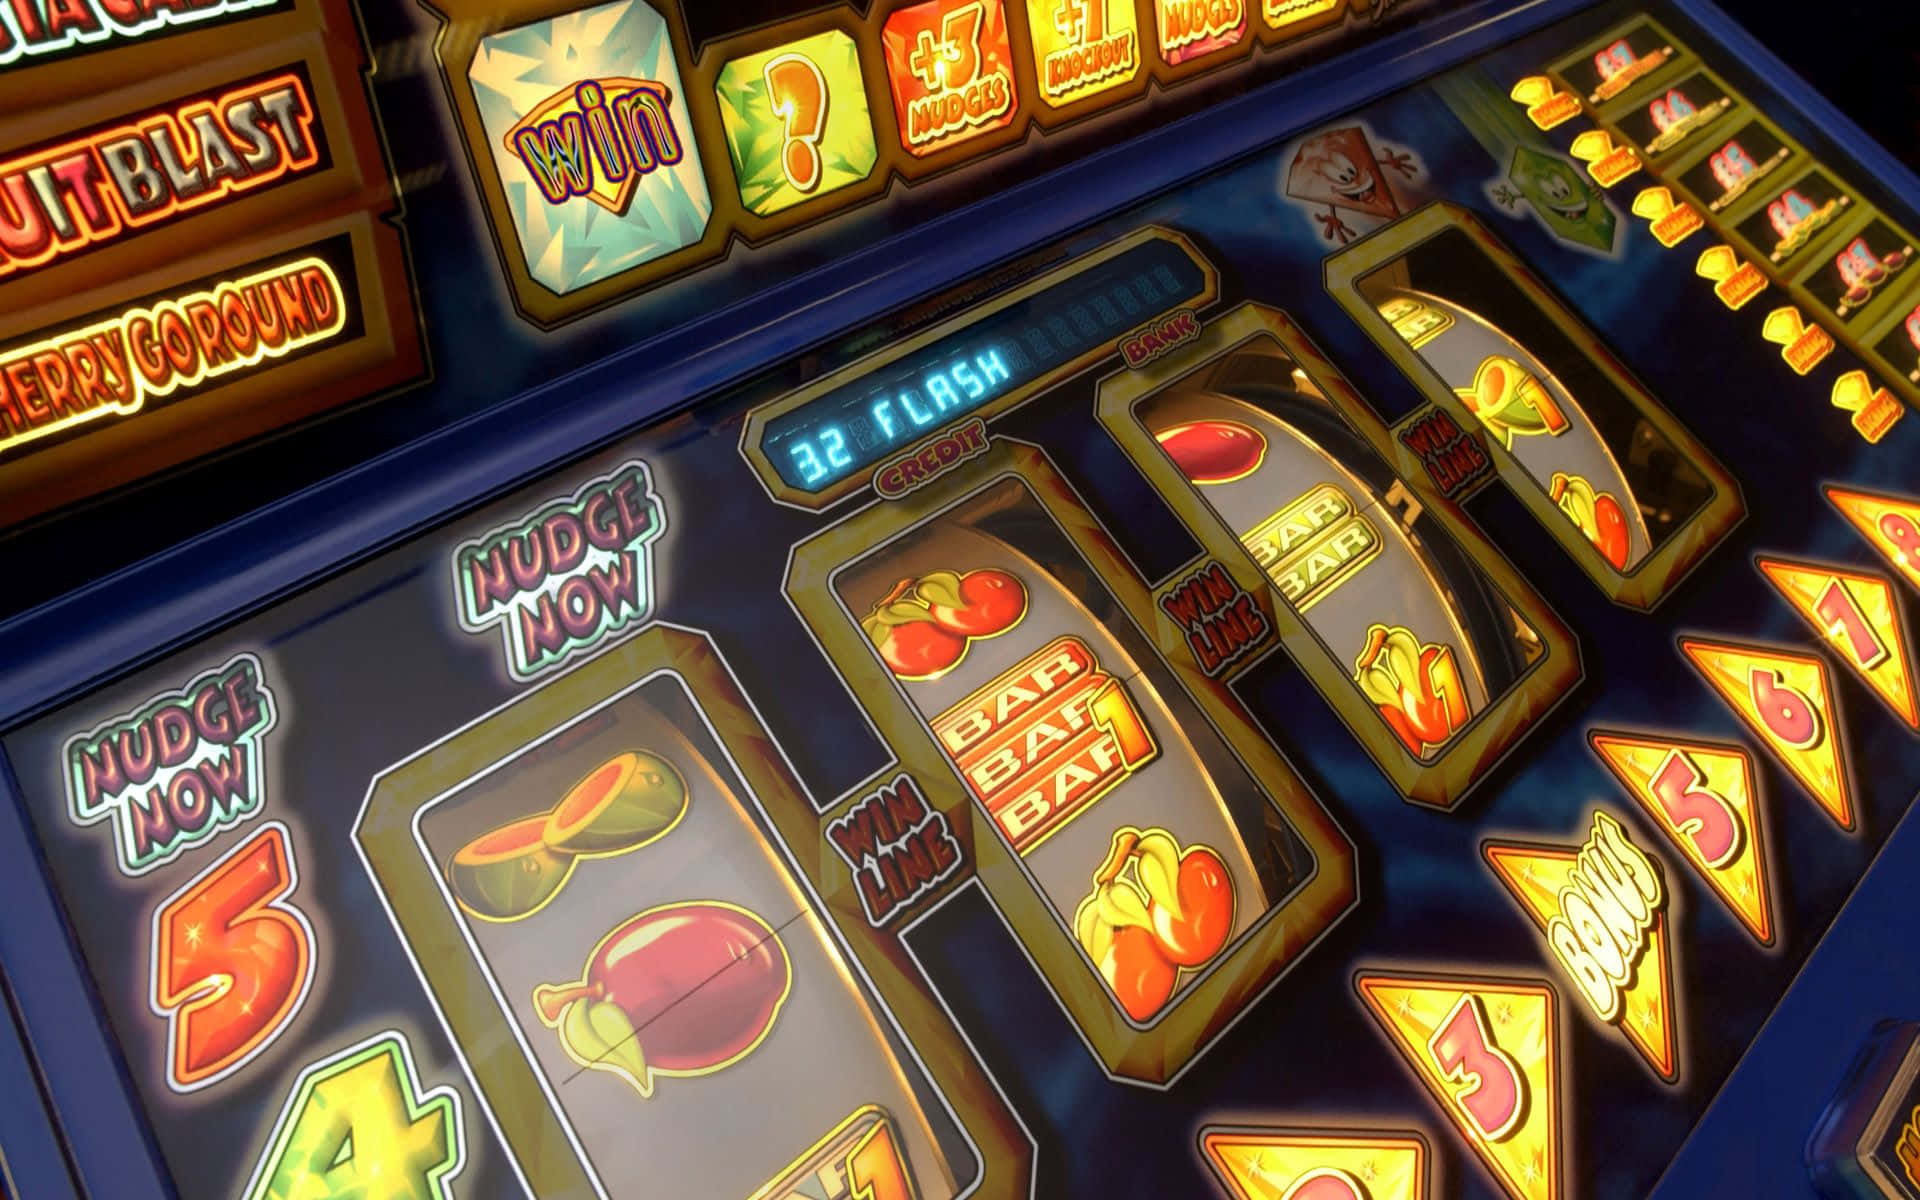 Welcome to the world of fun and fortune with Slot Machines!